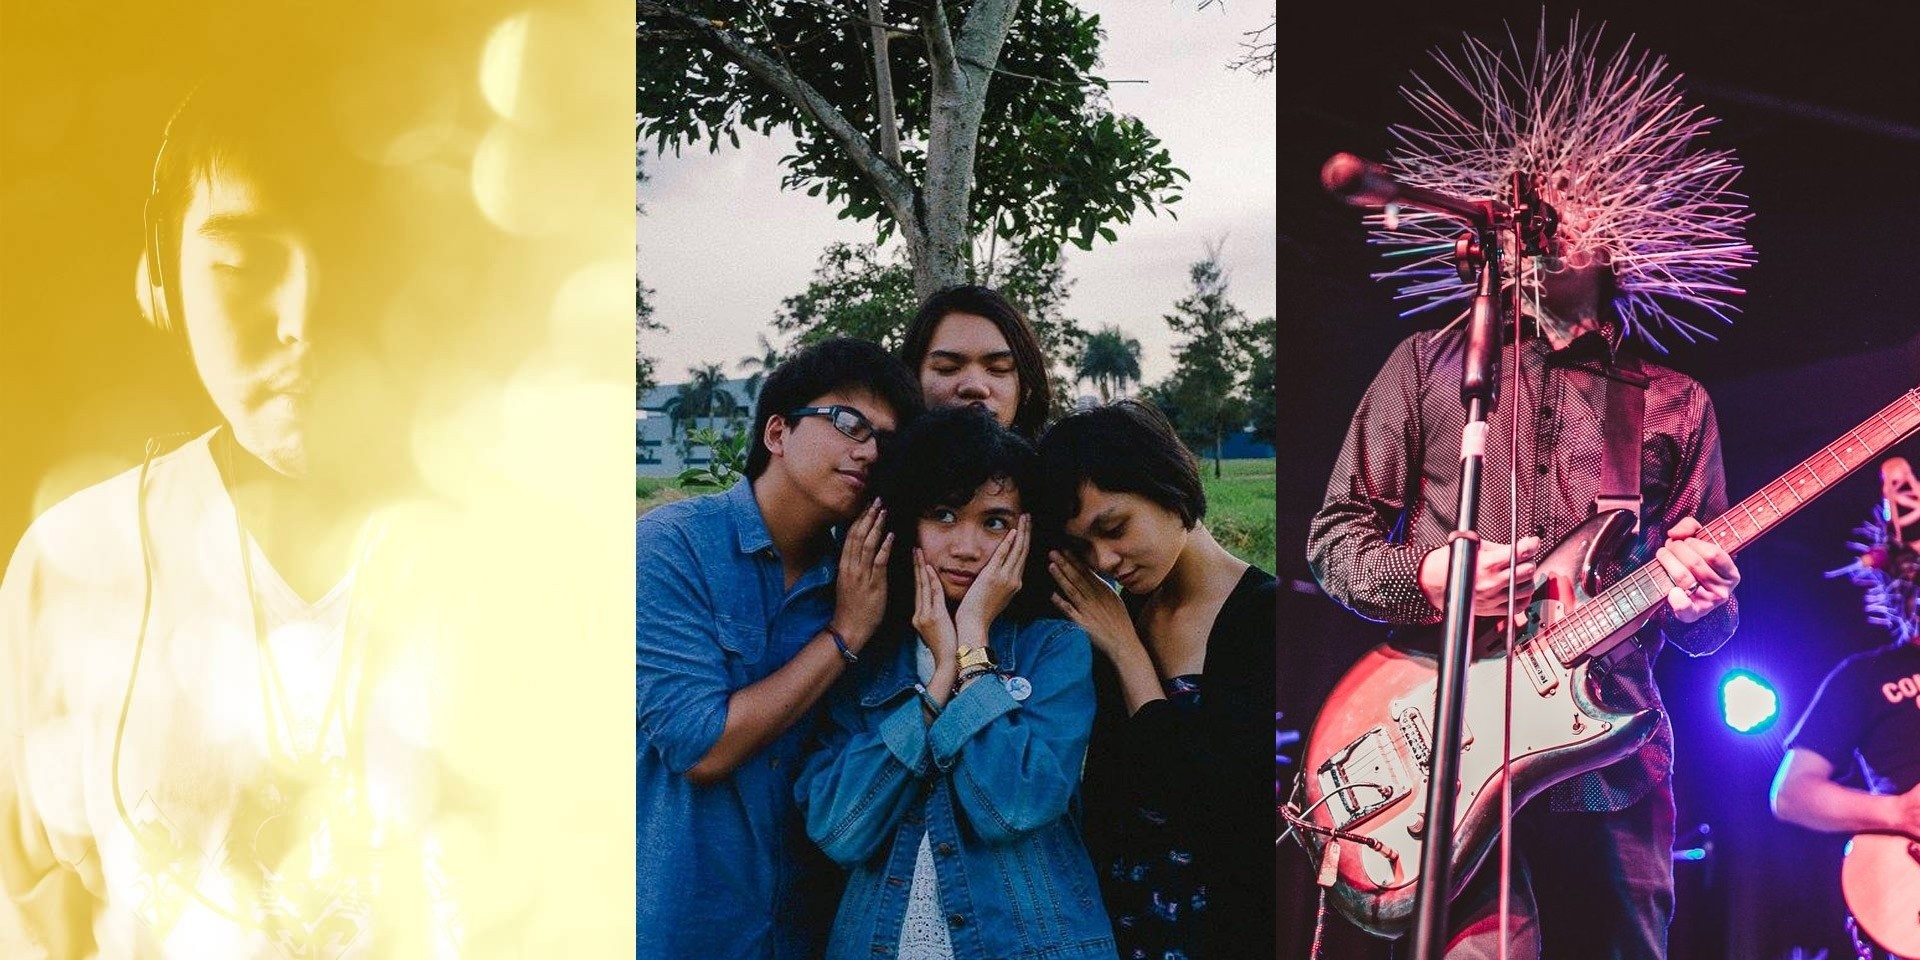 Circus 2020 to celebrate 1st anniversary this weekend with Pedicab, Ourselves the Elves, Similarobjects, and more